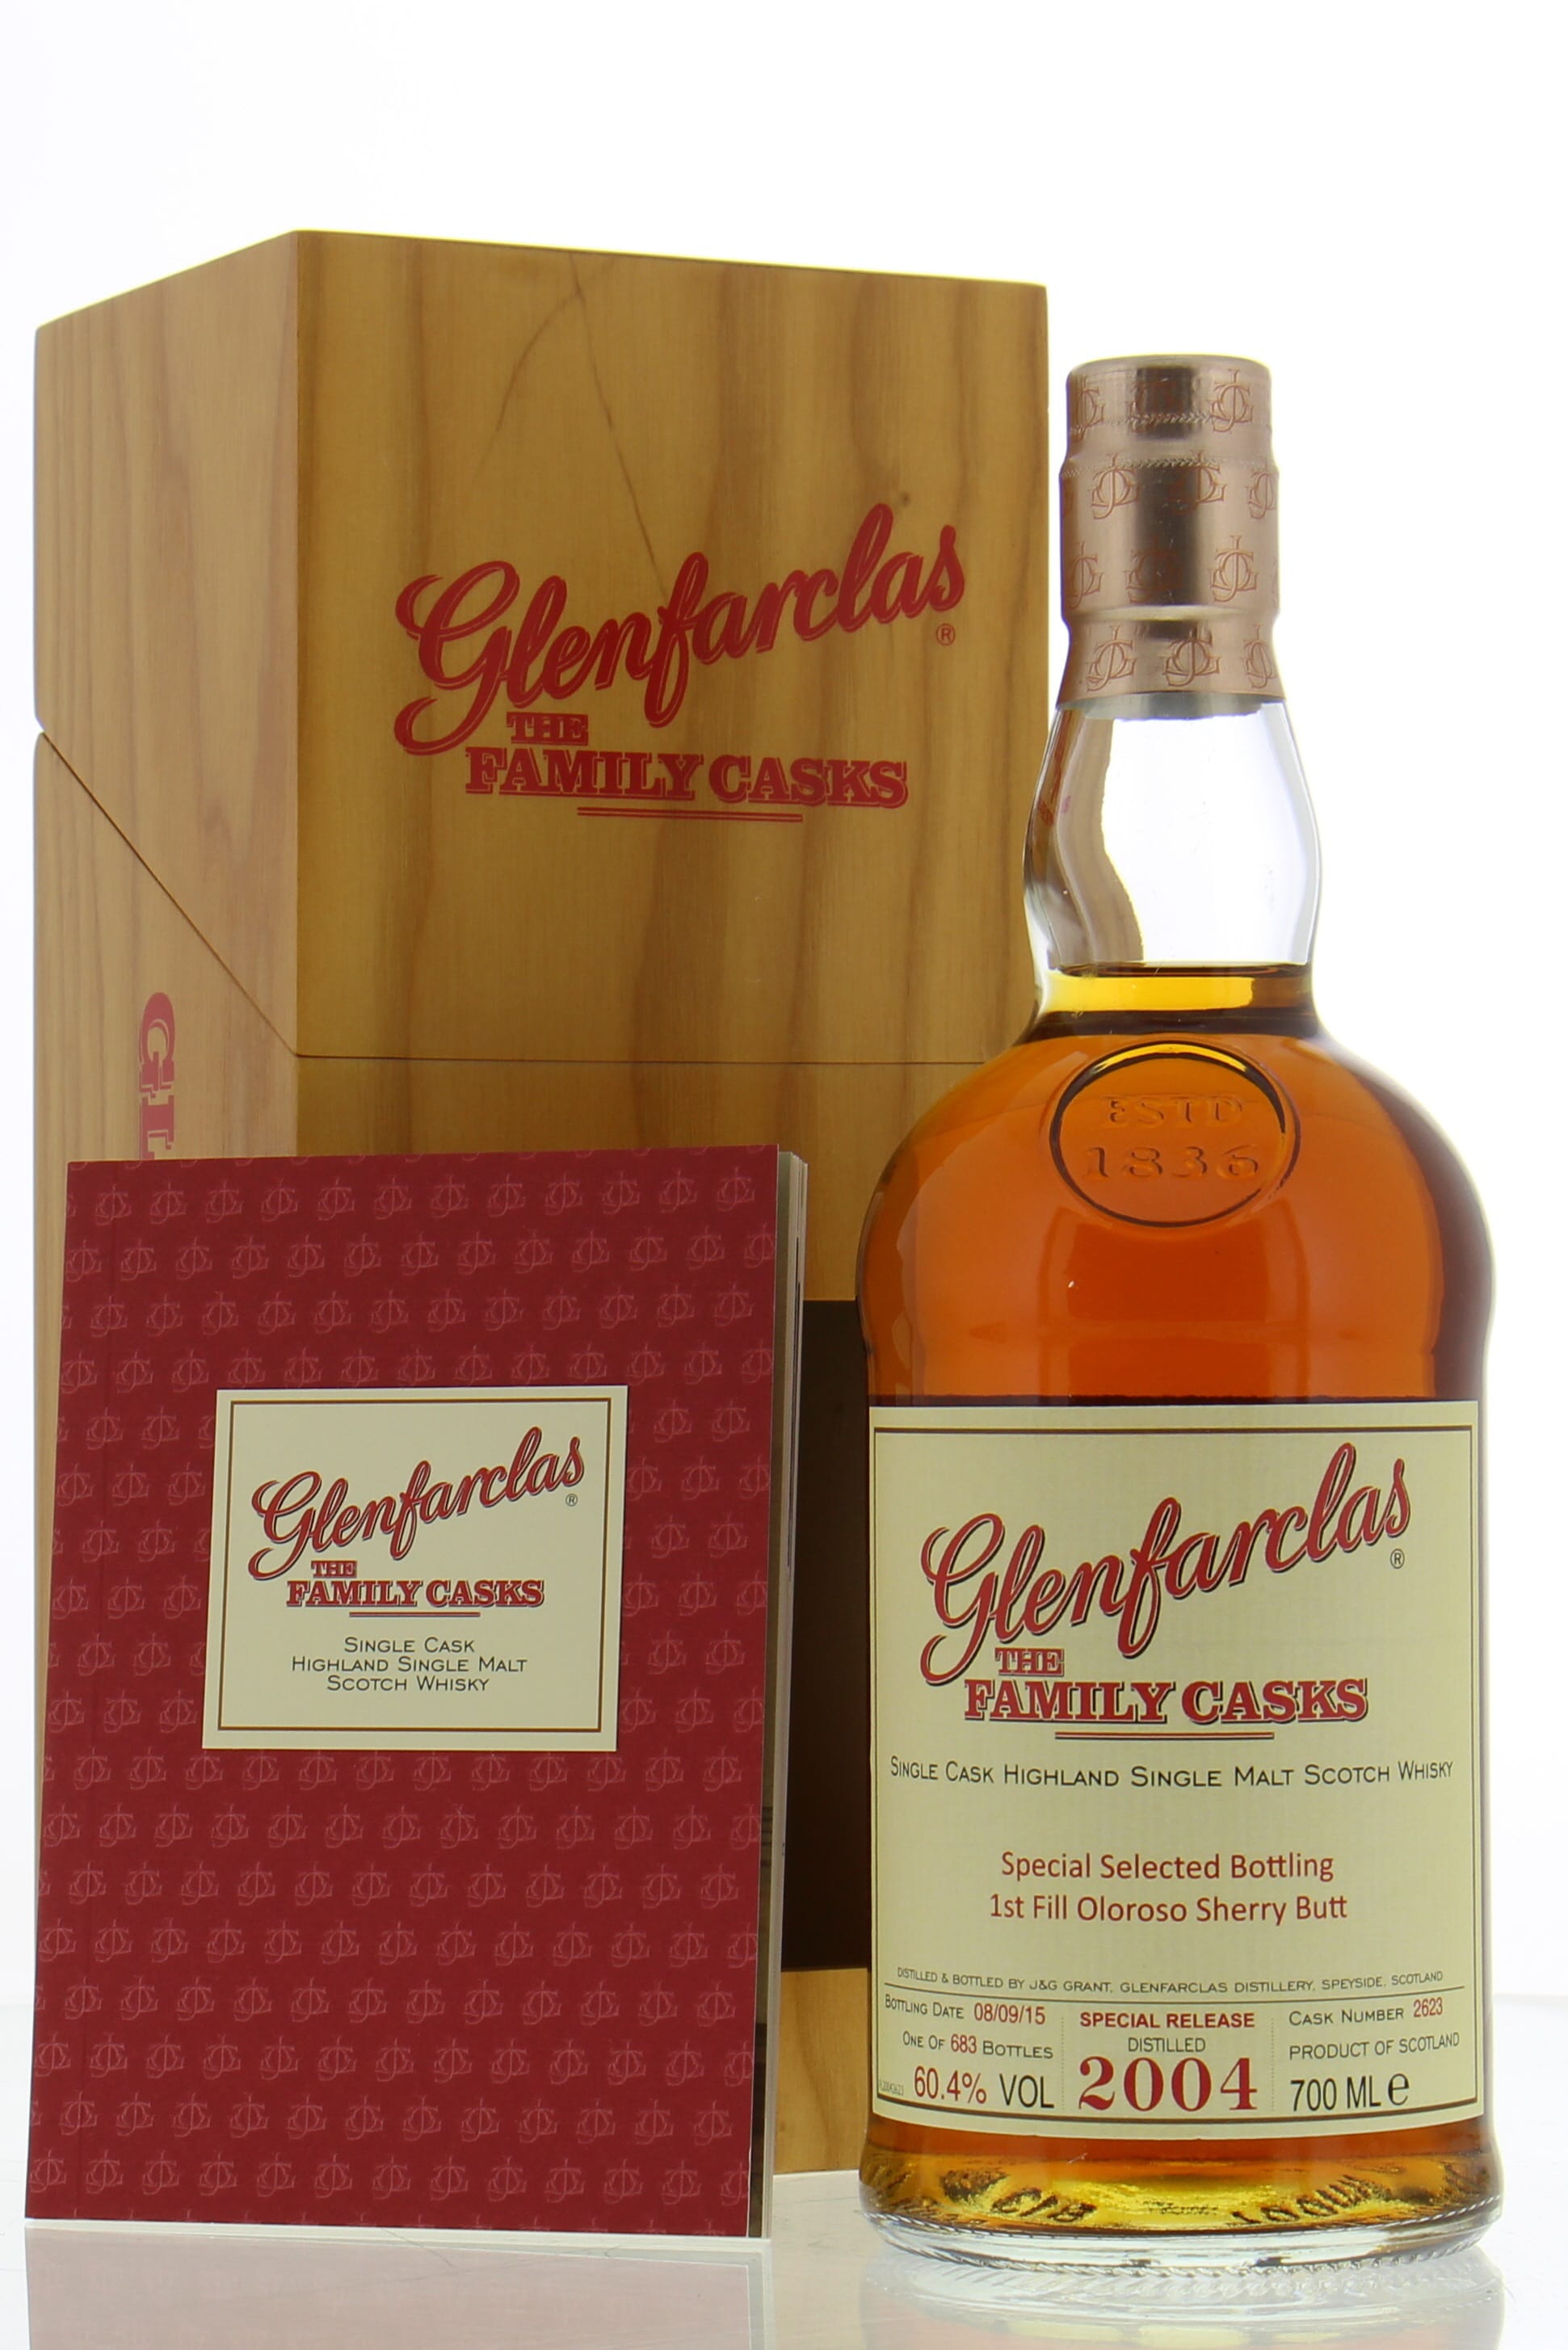 Glenfarclas - 2004 Family Cask 11 Years Old Cask:2623 Especially selected by van Wees 60.4% 2004